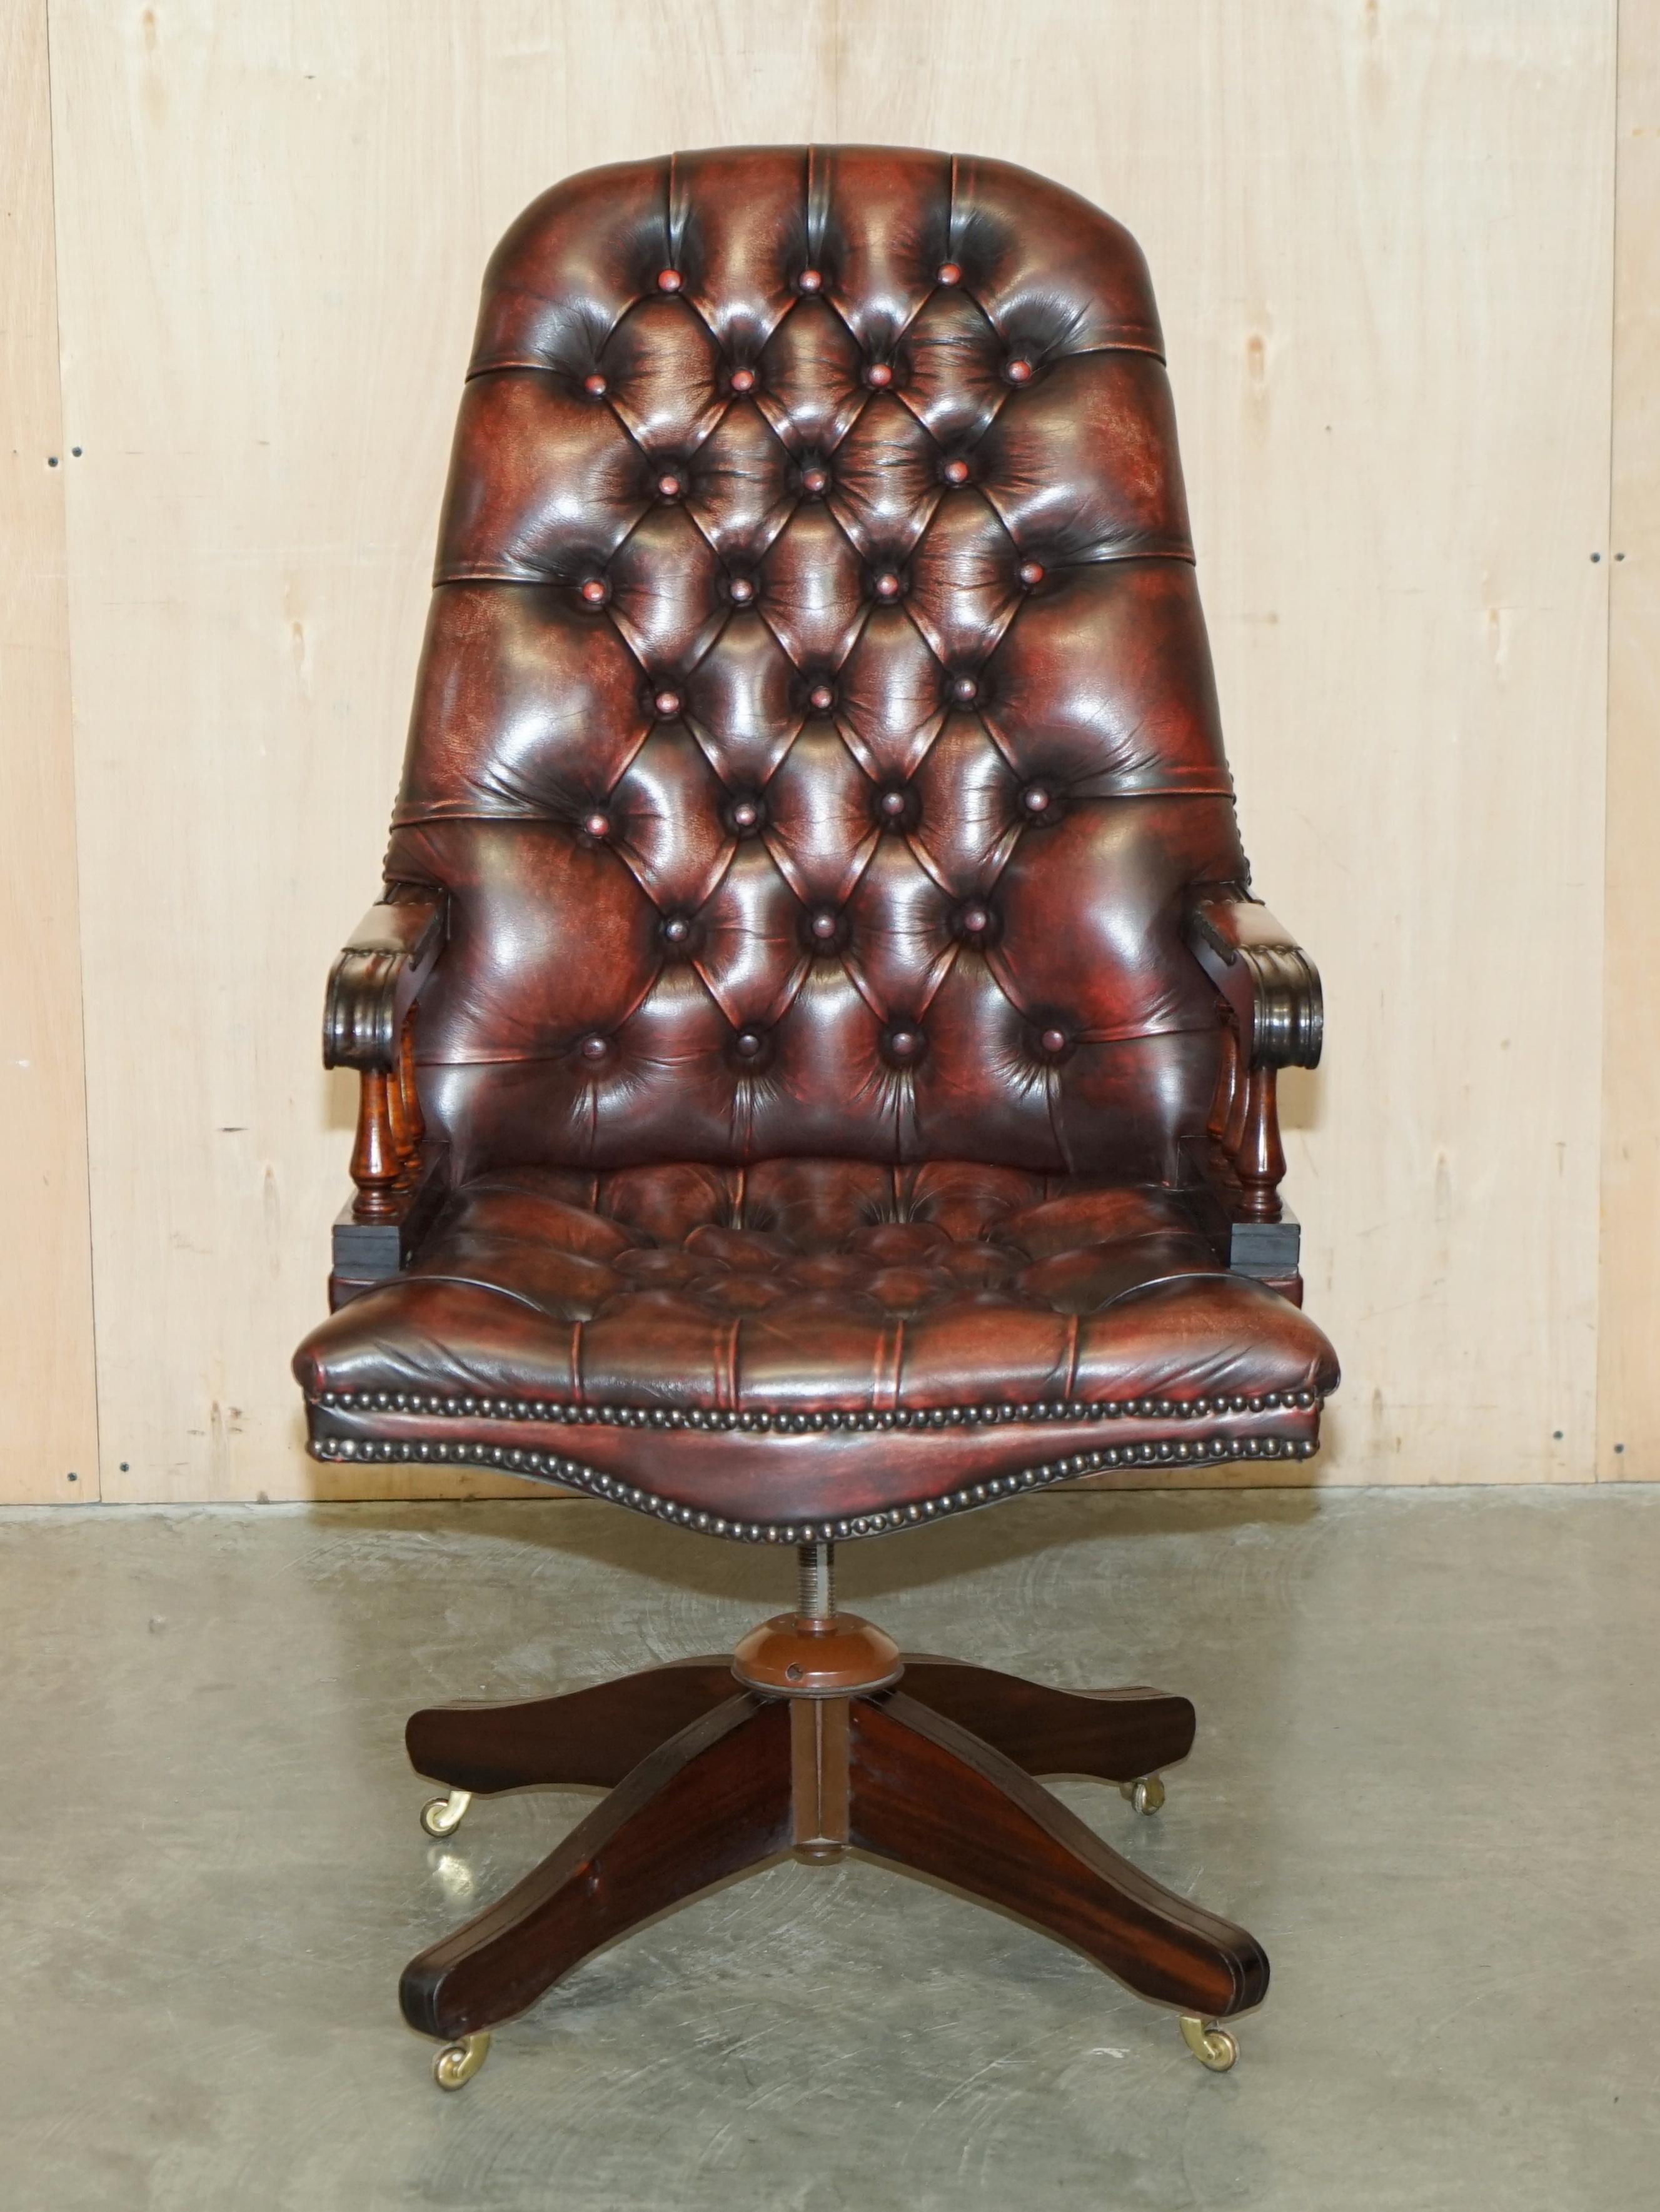 Royal House Antiques

Royal House Antiques is delighted to offer for sale this very good looking hand dyed Oxblood leather high back Chesterfield swivel captains armchair 

Please note the delivery fee listed is just a guide, it covers within the